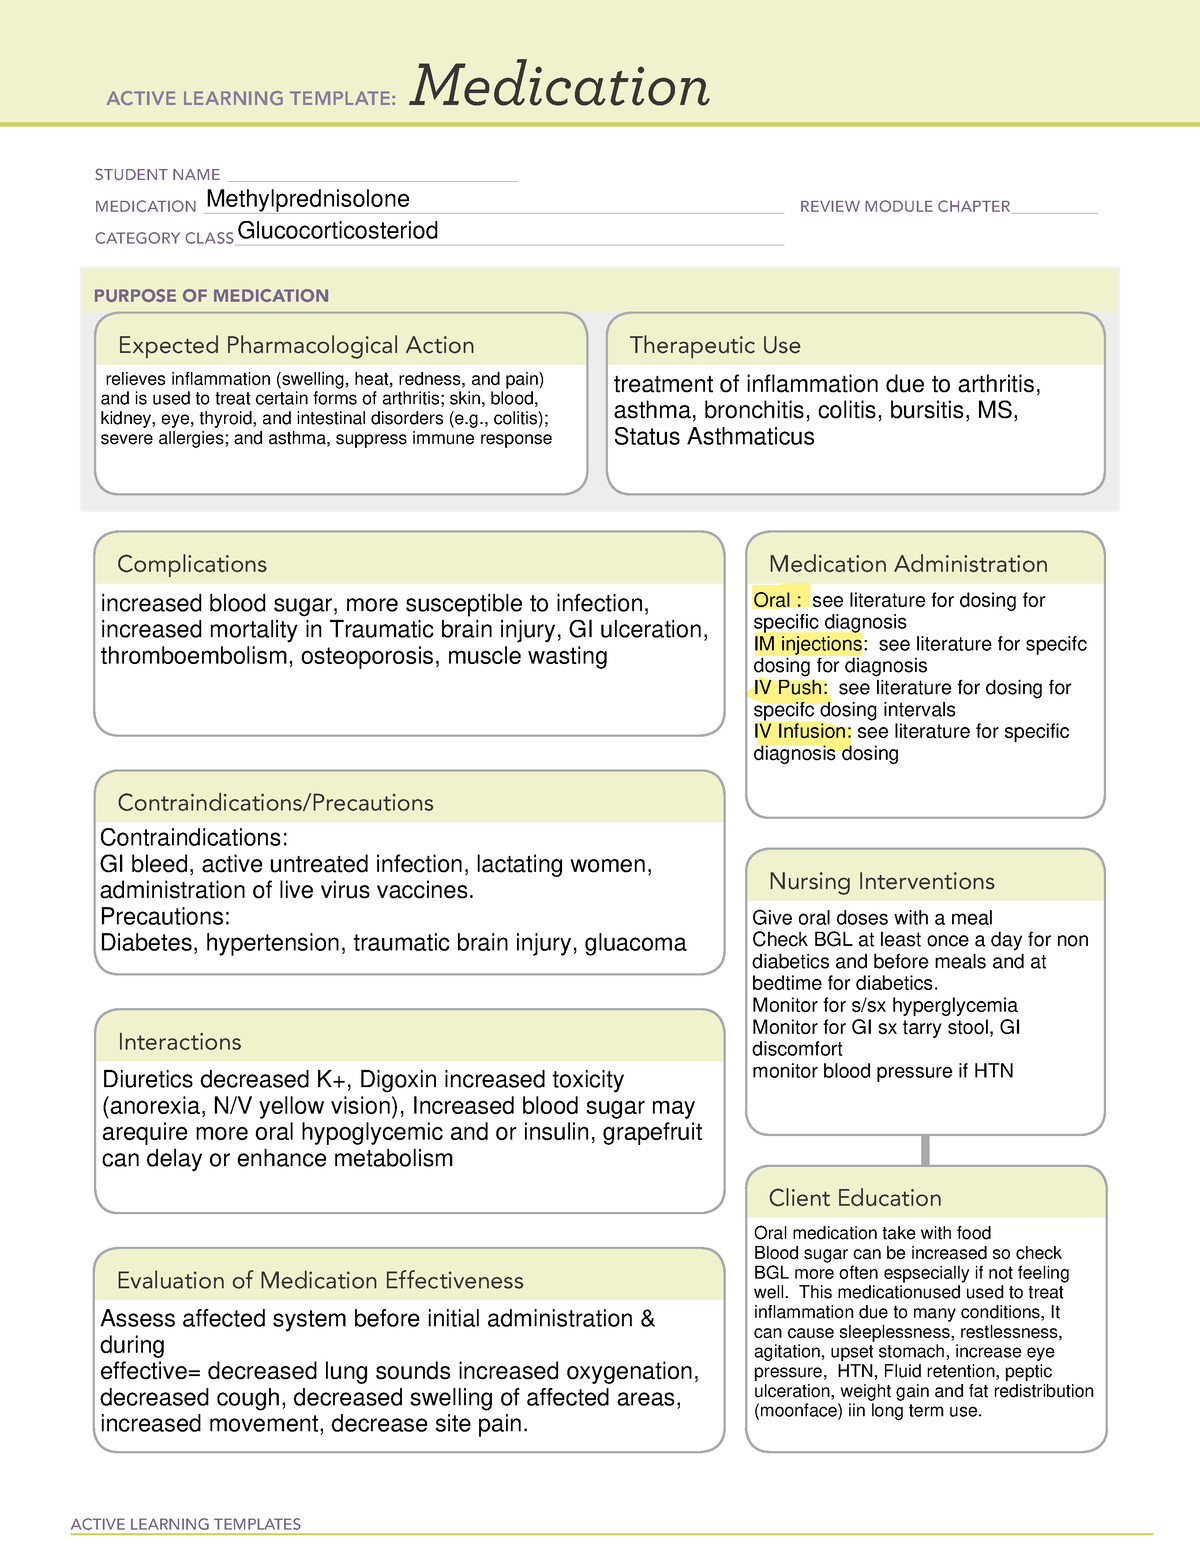 methylprednisolone-ati-medication-template-active-learning-templates